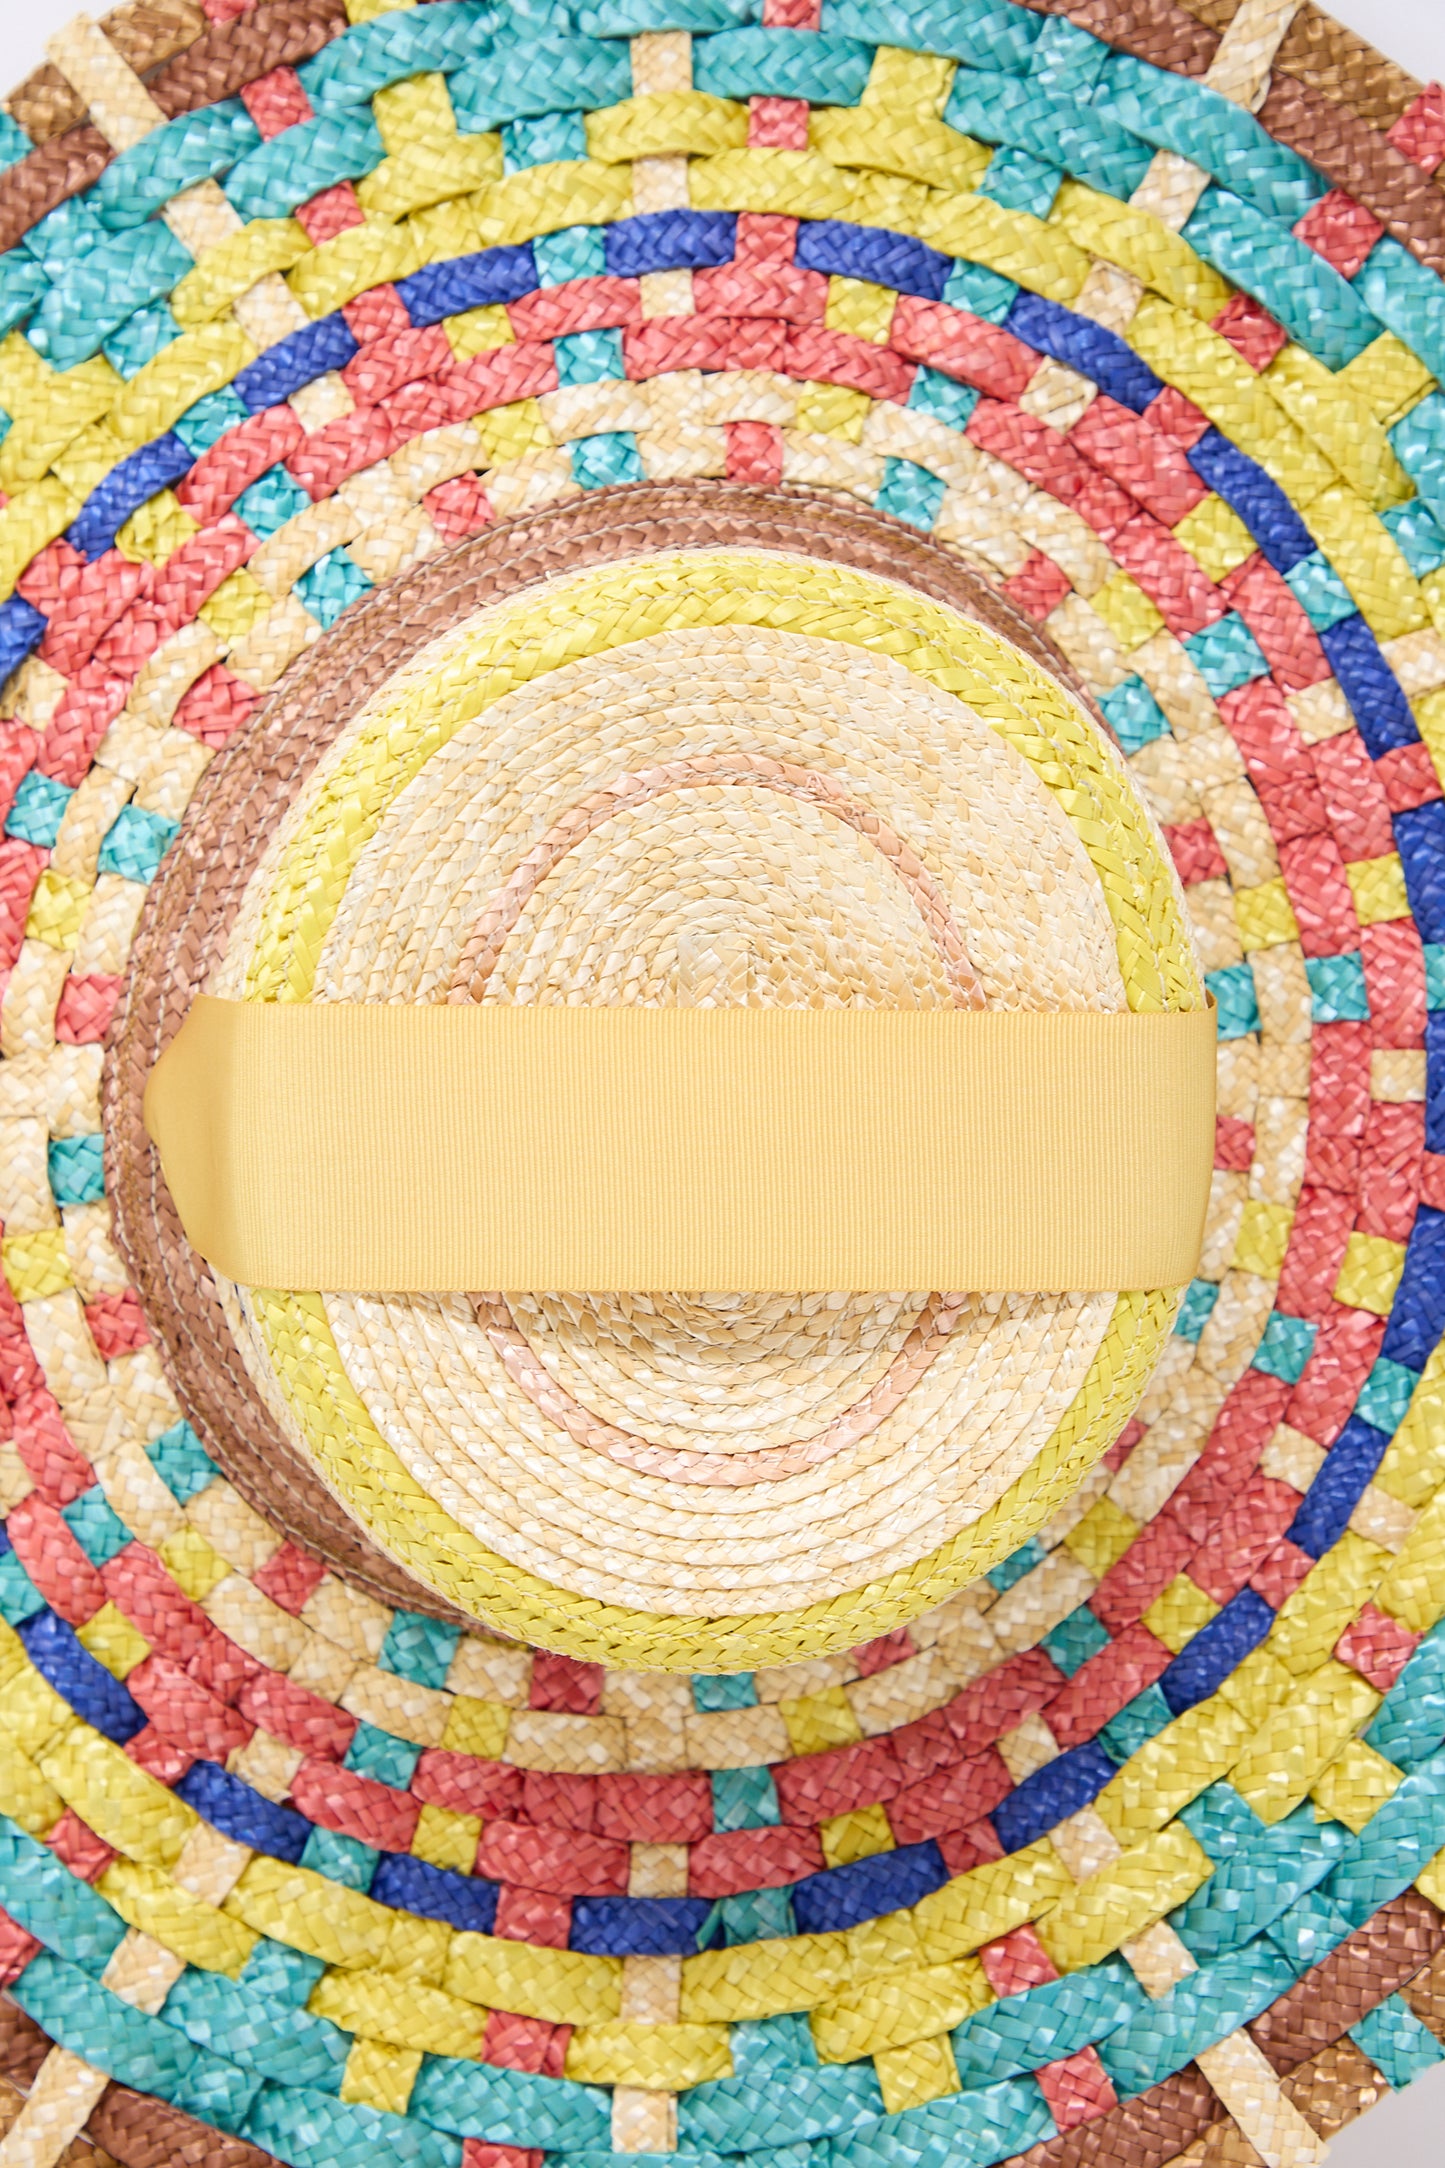 Top view of a colorful handmade Straw Cuchi Tris-Tras No. 94 Hat with Laces by Zahati featuring a wide yellow ribbon, with a pattern of concentric circles in blue, green, red, and natural braided straw colors.